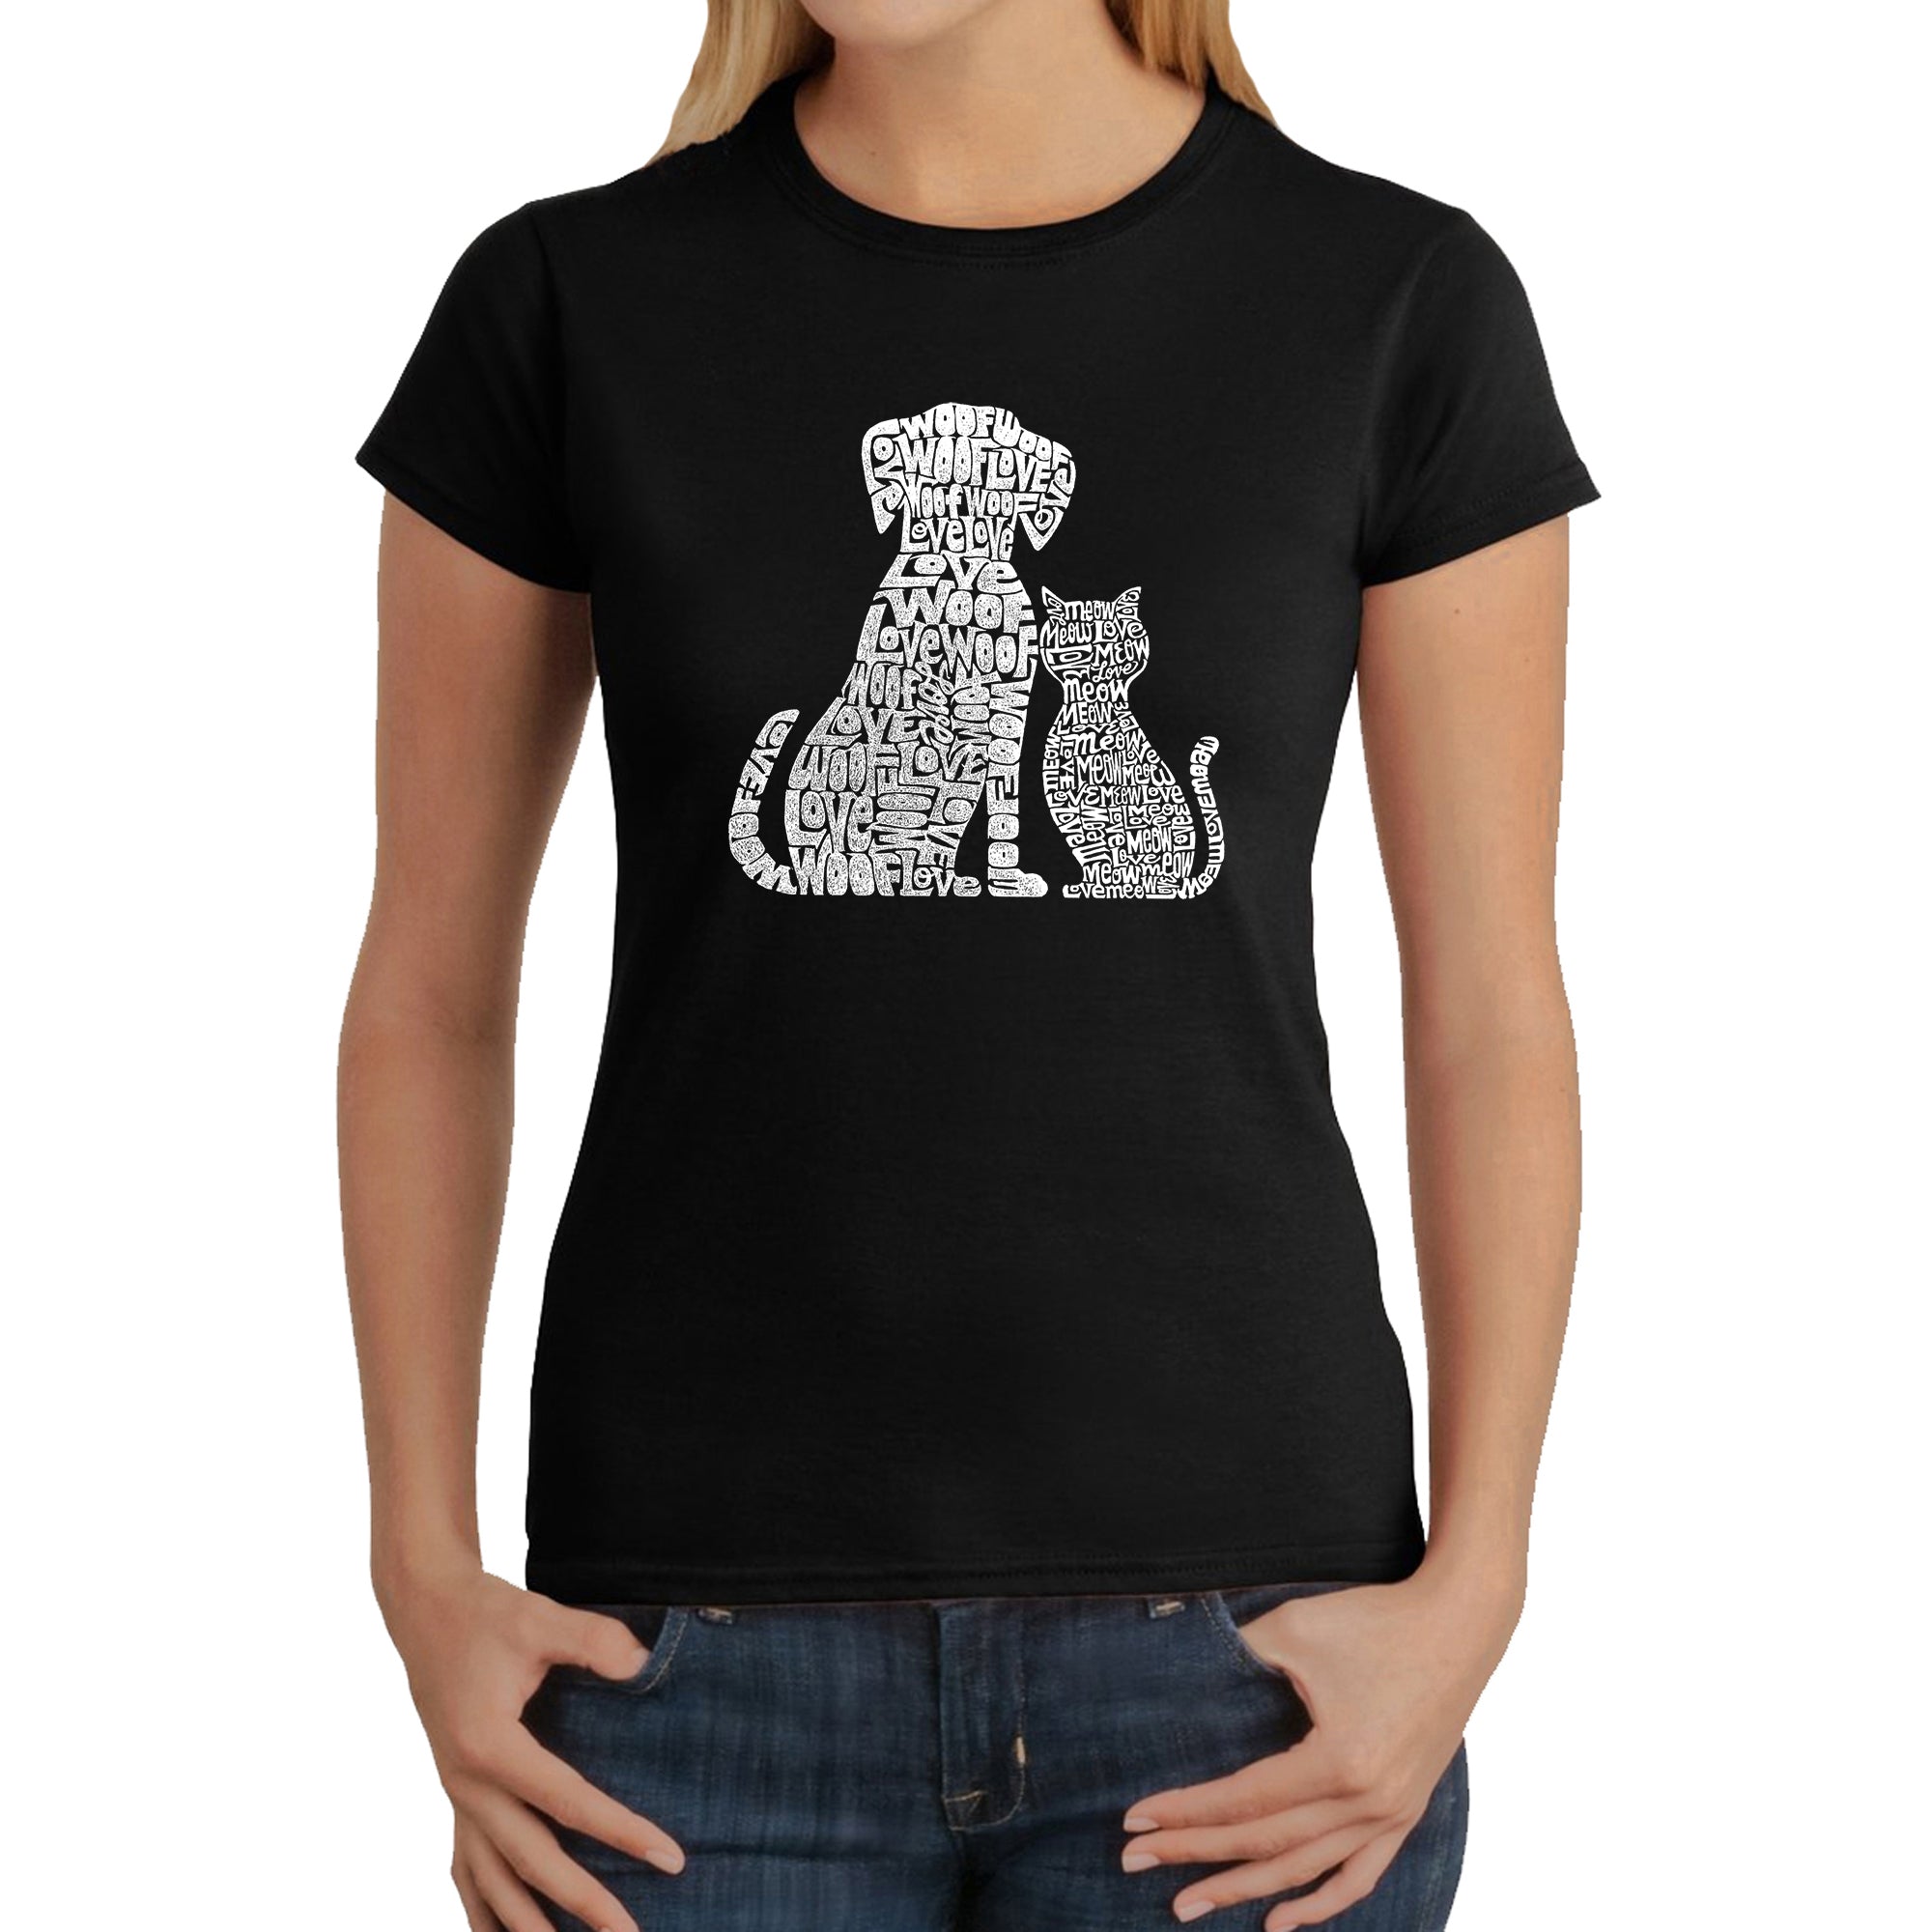 Dogs And Cats - Women's Word Art T-Shirt - Navy - Large